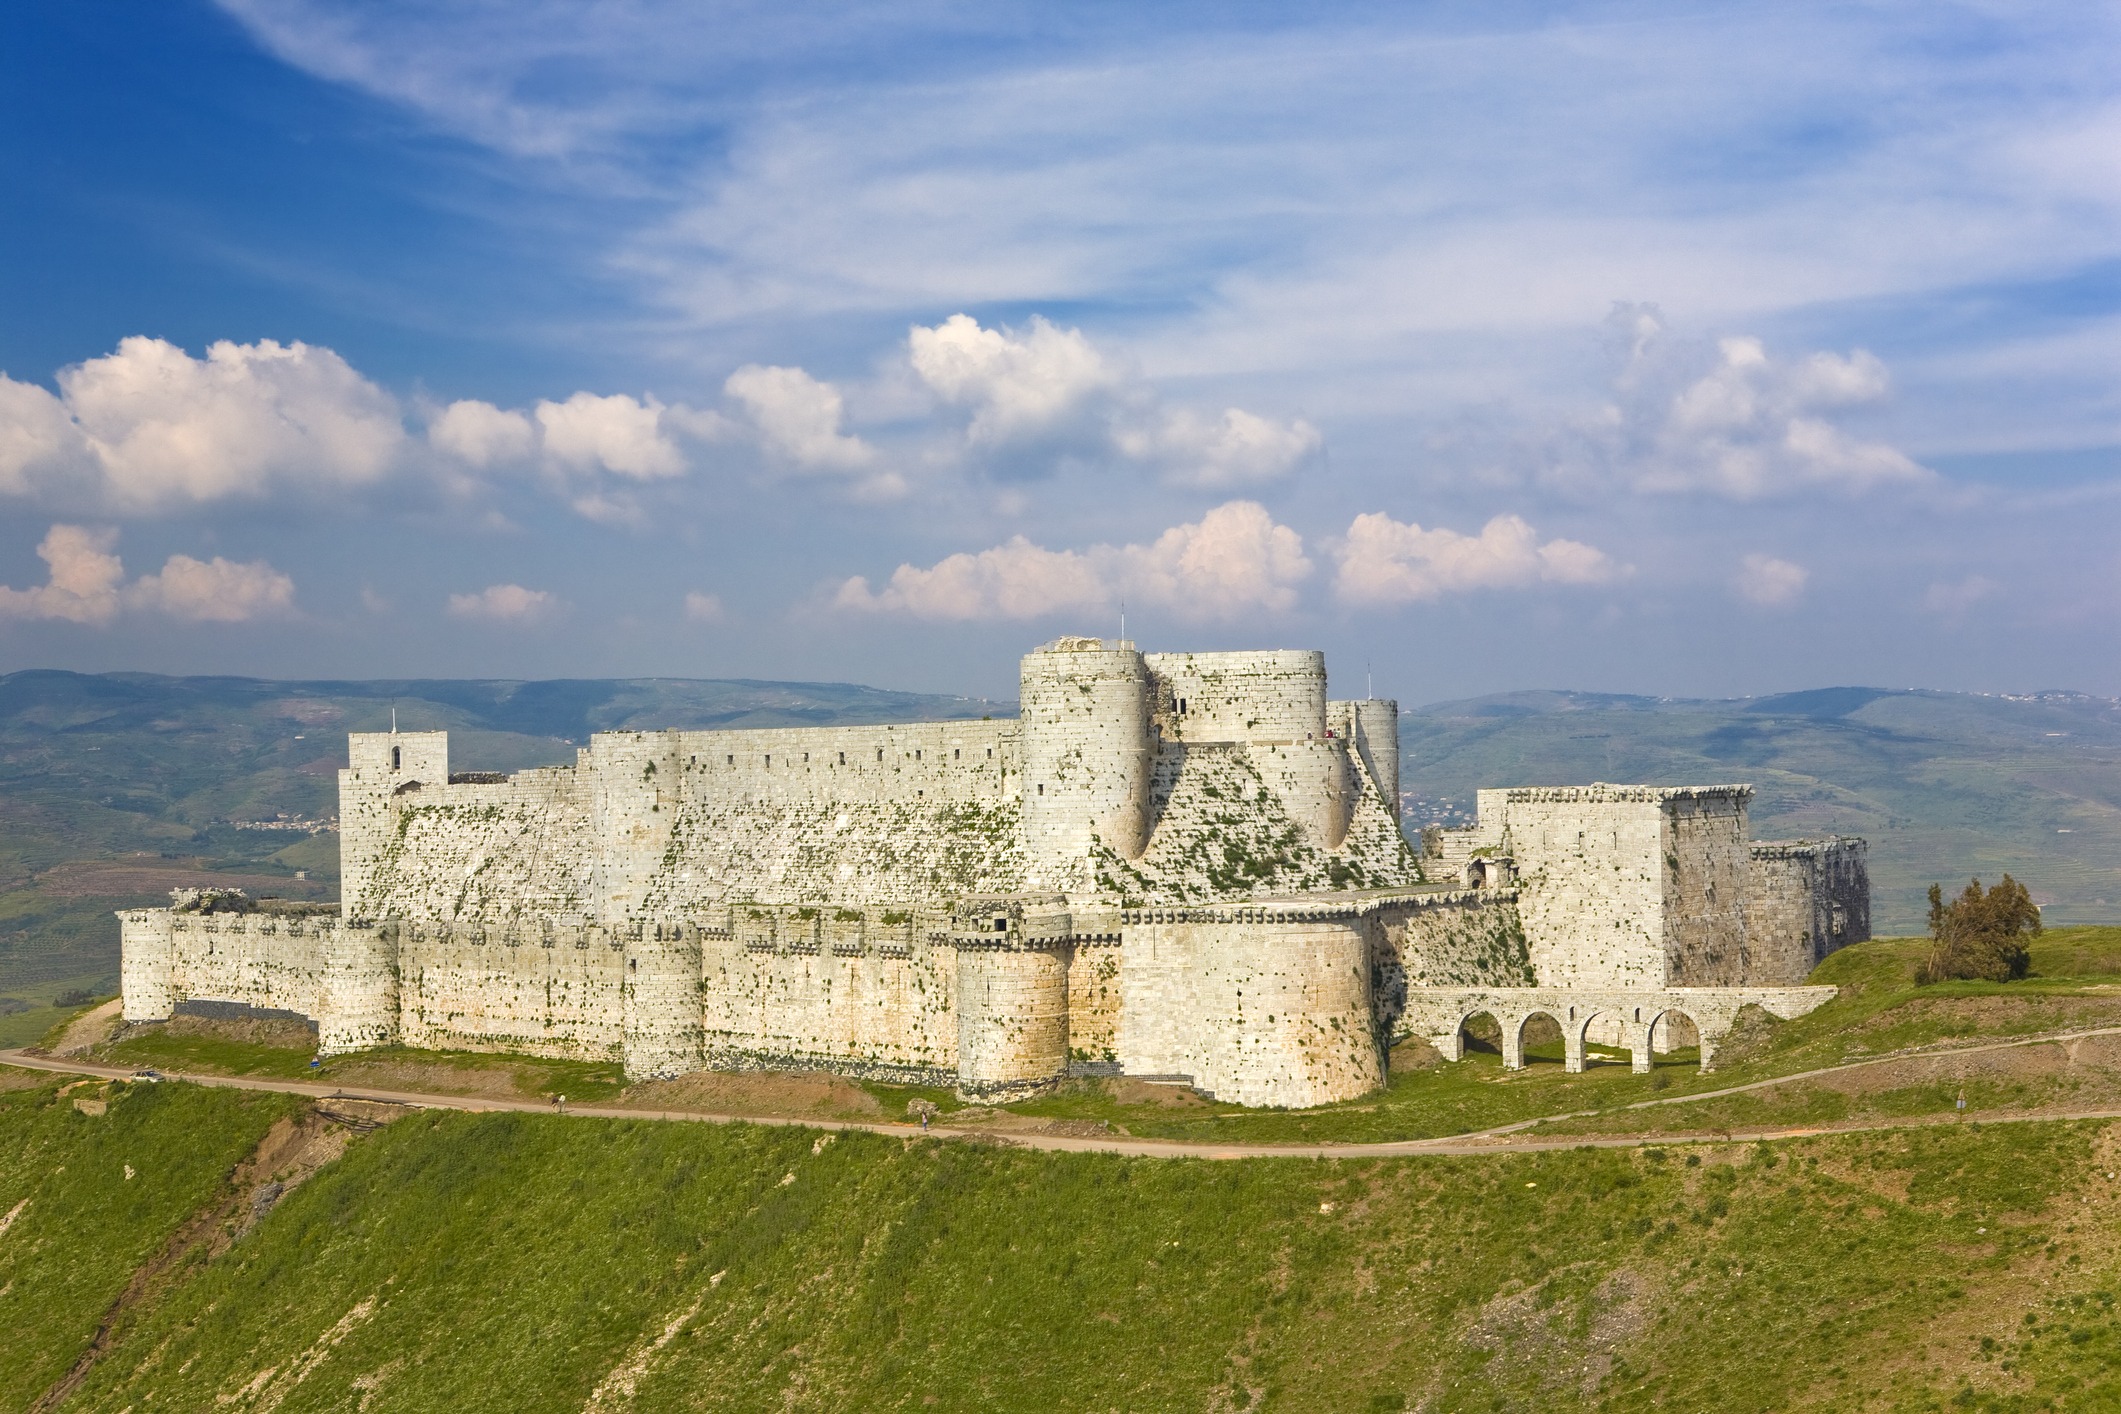 the beautiful Crac des Chevaliers in Syria